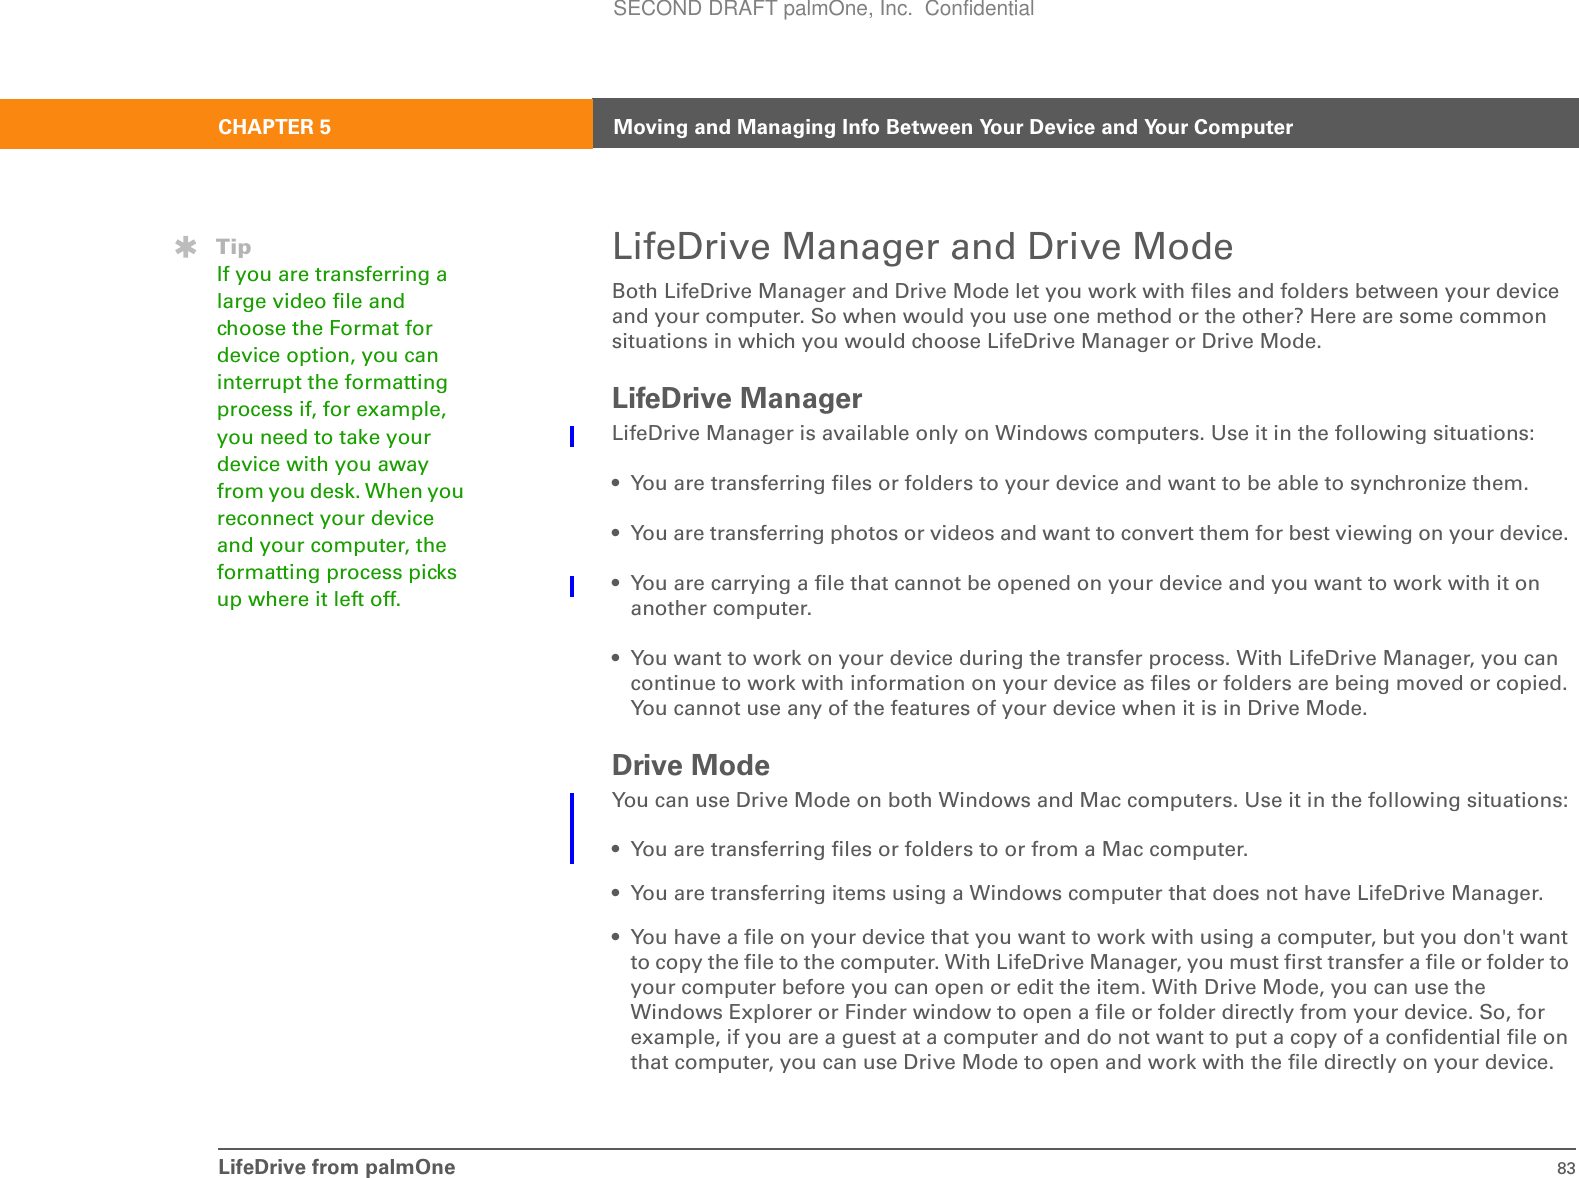 LifeDrive from palmOne 83CHAPTER 5 Moving and Managing Info Between Your Device and Your ComputerLifeDrive Manager and Drive ModeBoth LifeDrive Manager and Drive Mode let you work with files and folders between your device and your computer. So when would you use one method or the other? Here are some common situations in which you would choose LifeDrive Manager or Drive Mode.LifeDrive ManagerLifeDrive Manager is available only on Windows computers. Use it in the following situations:• You are transferring files or folders to your device and want to be able to synchronize them.• You are transferring photos or videos and want to convert them for best viewing on your device. • You are carrying a file that cannot be opened on your device and you want to work with it on another computer.• You want to work on your device during the transfer process. With LifeDrive Manager, you can continue to work with information on your device as files or folders are being moved or copied. You cannot use any of the features of your device when it is in Drive Mode.Drive ModeYou can use Drive Mode on both Windows and Mac computers. Use it in the following situations:• You are transferring files or folders to or from a Mac computer. • You are transferring items using a Windows computer that does not have LifeDrive Manager.• You have a file on your device that you want to work with using a computer, but you don&apos;t want to copy the file to the computer. With LifeDrive Manager, you must first transfer a file or folder to your computer before you can open or edit the item. With Drive Mode, you can use the Windows Explorer or Finder window to open a file or folder directly from your device. So, for example, if you are a guest at a computer and do not want to put a copy of a confidential file on that computer, you can use Drive Mode to open and work with the file directly on your device.TipIf you are transferring a large video file and choose the Format for device option, you can interrupt the formatting process if, for example, you need to take your device with you away from you desk. When you reconnect your device and your computer, the formatting process picks up where it left off.SECOND DRAFT palmOne, Inc.  Confidential